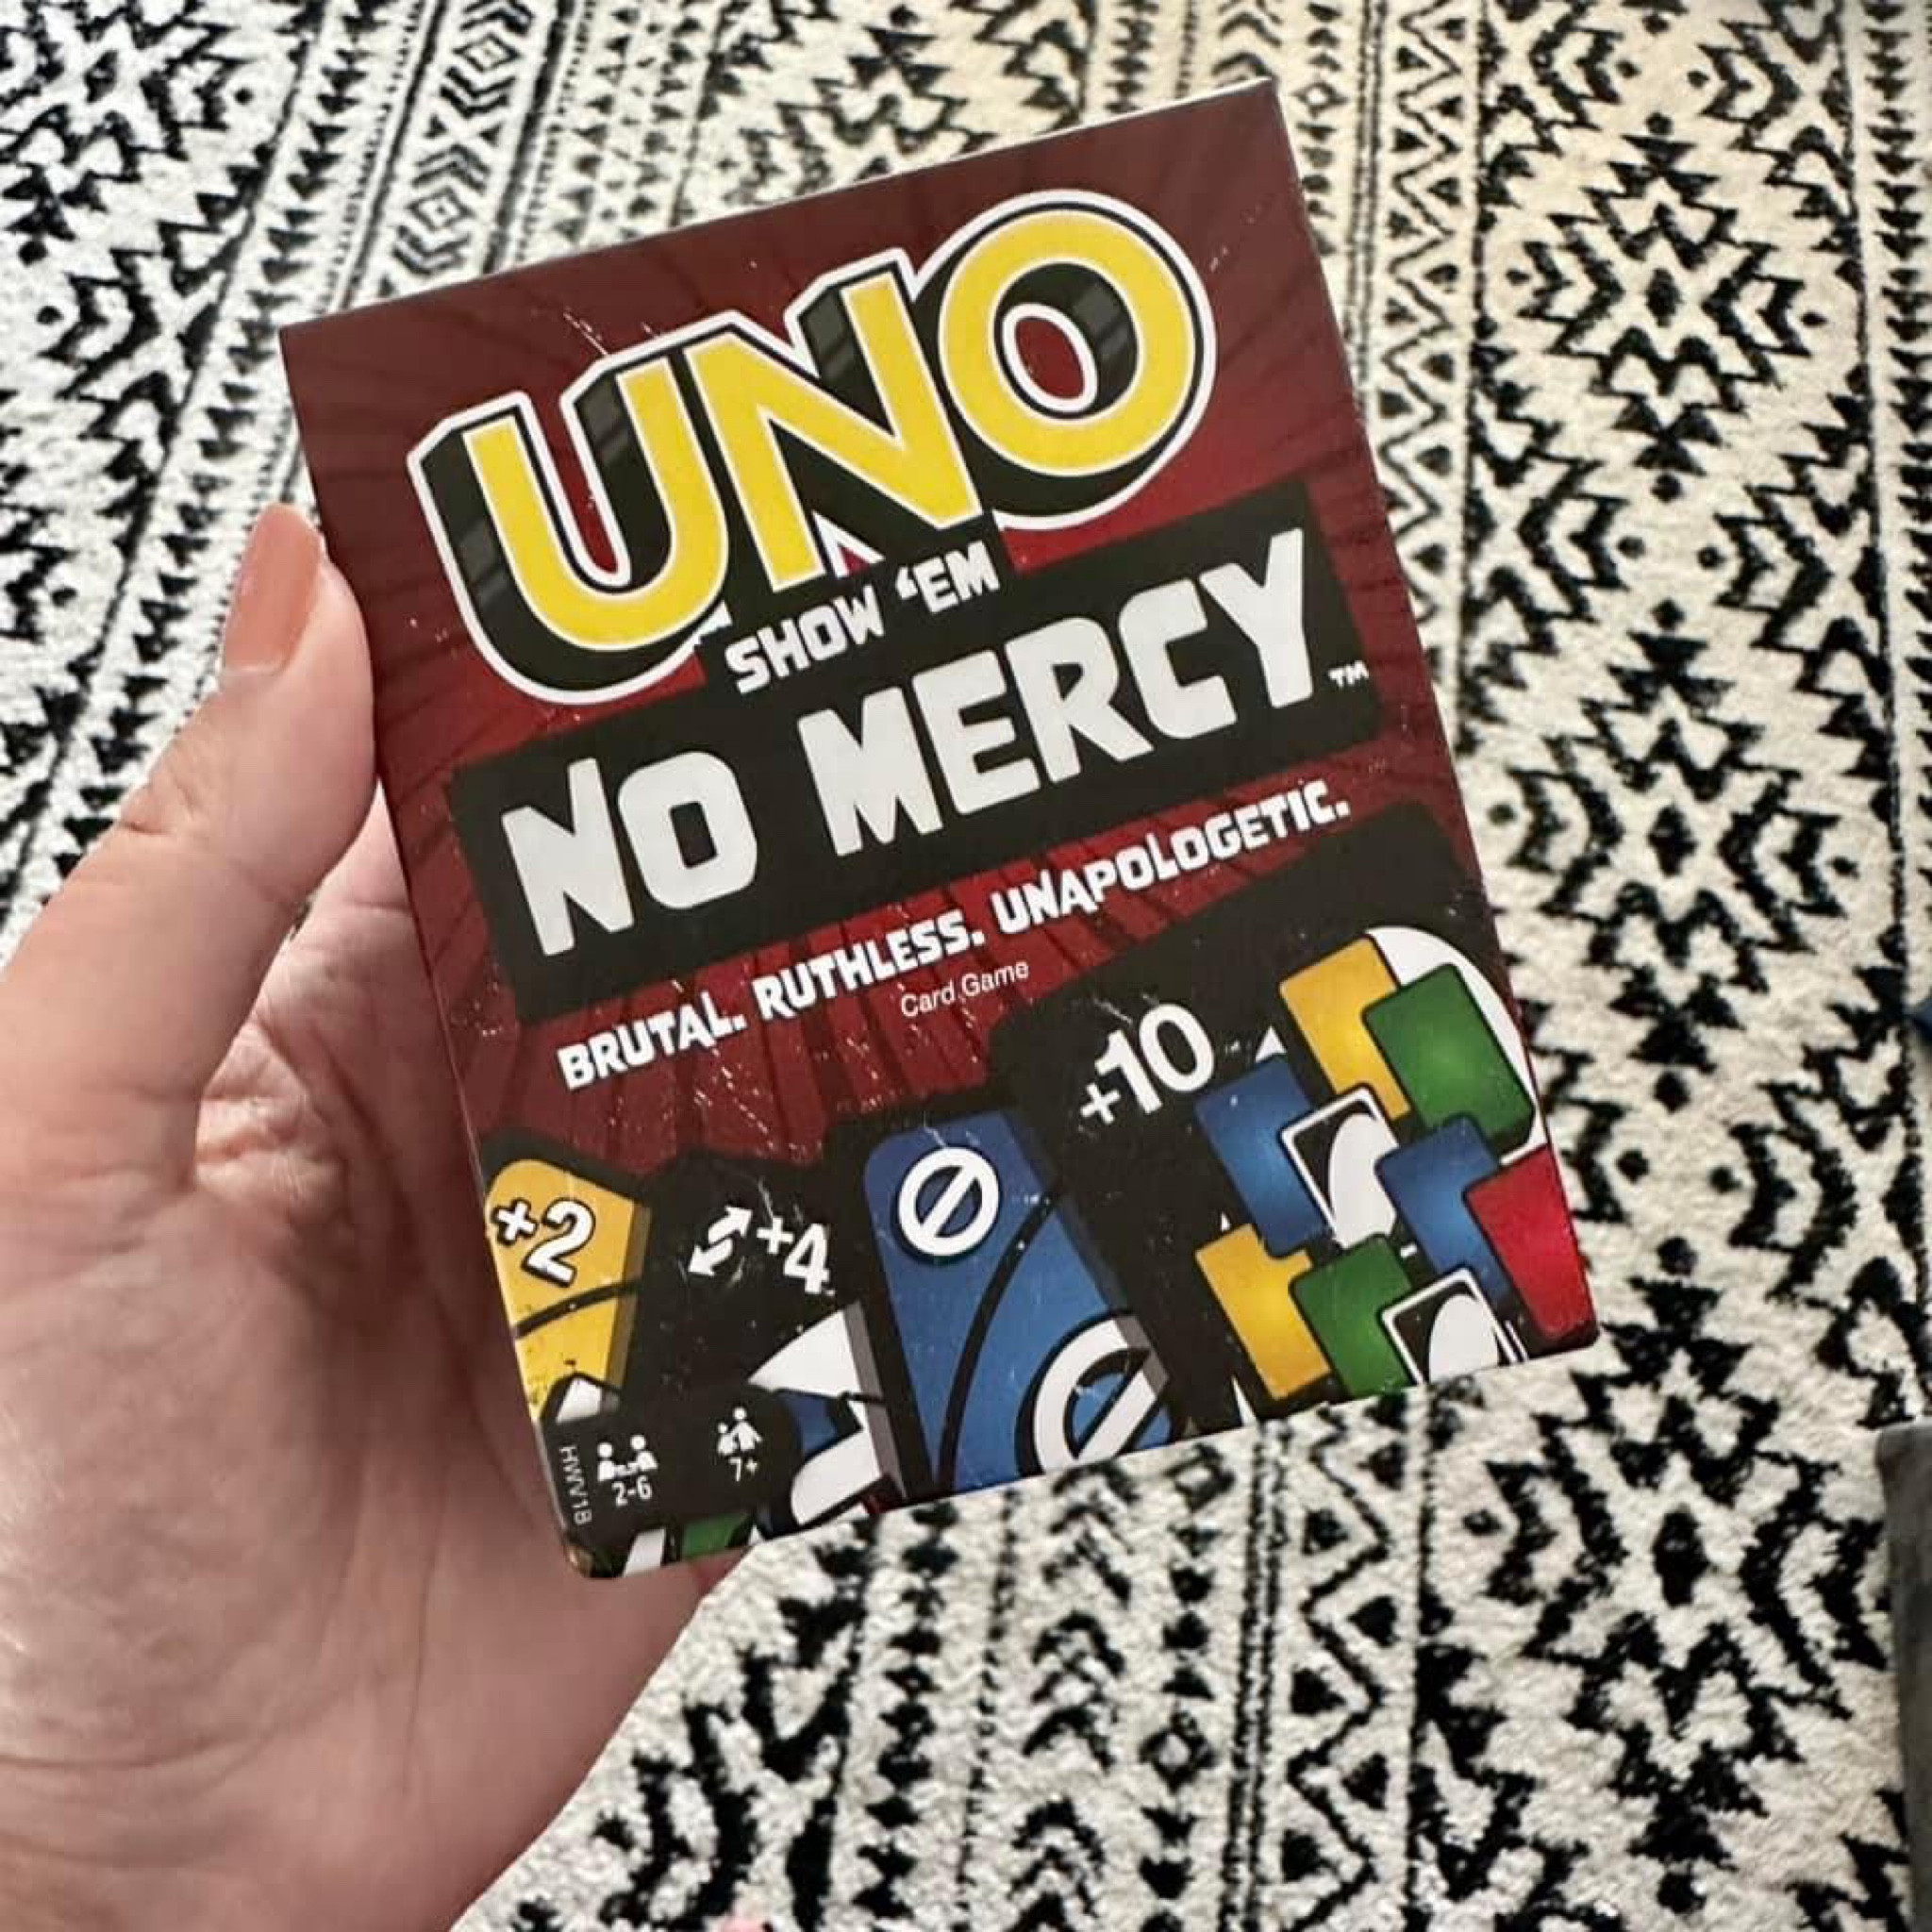 Uno No mercy😎, Gallery posted by Kingkoffeyy